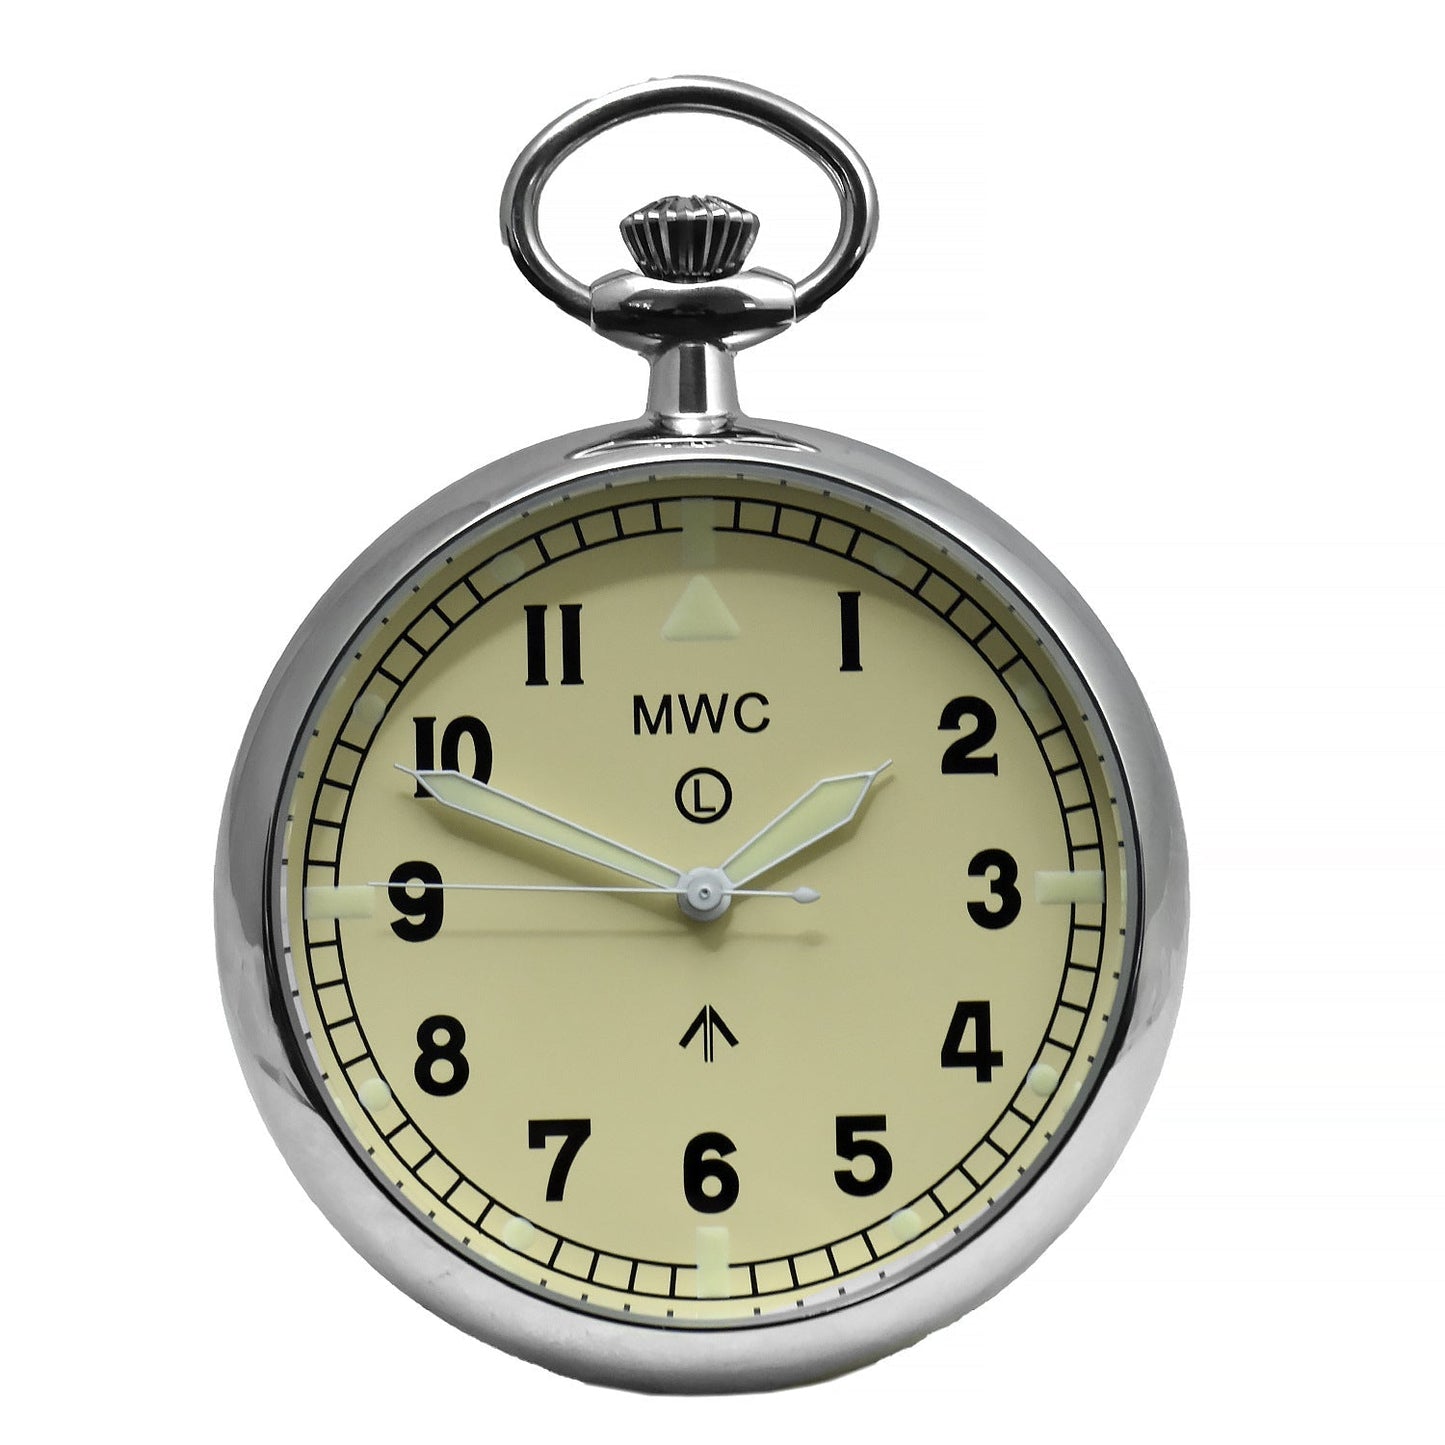 General Service Military Pocket Watch (24 Jewel Automatic Movement with Option to Hand Wind)